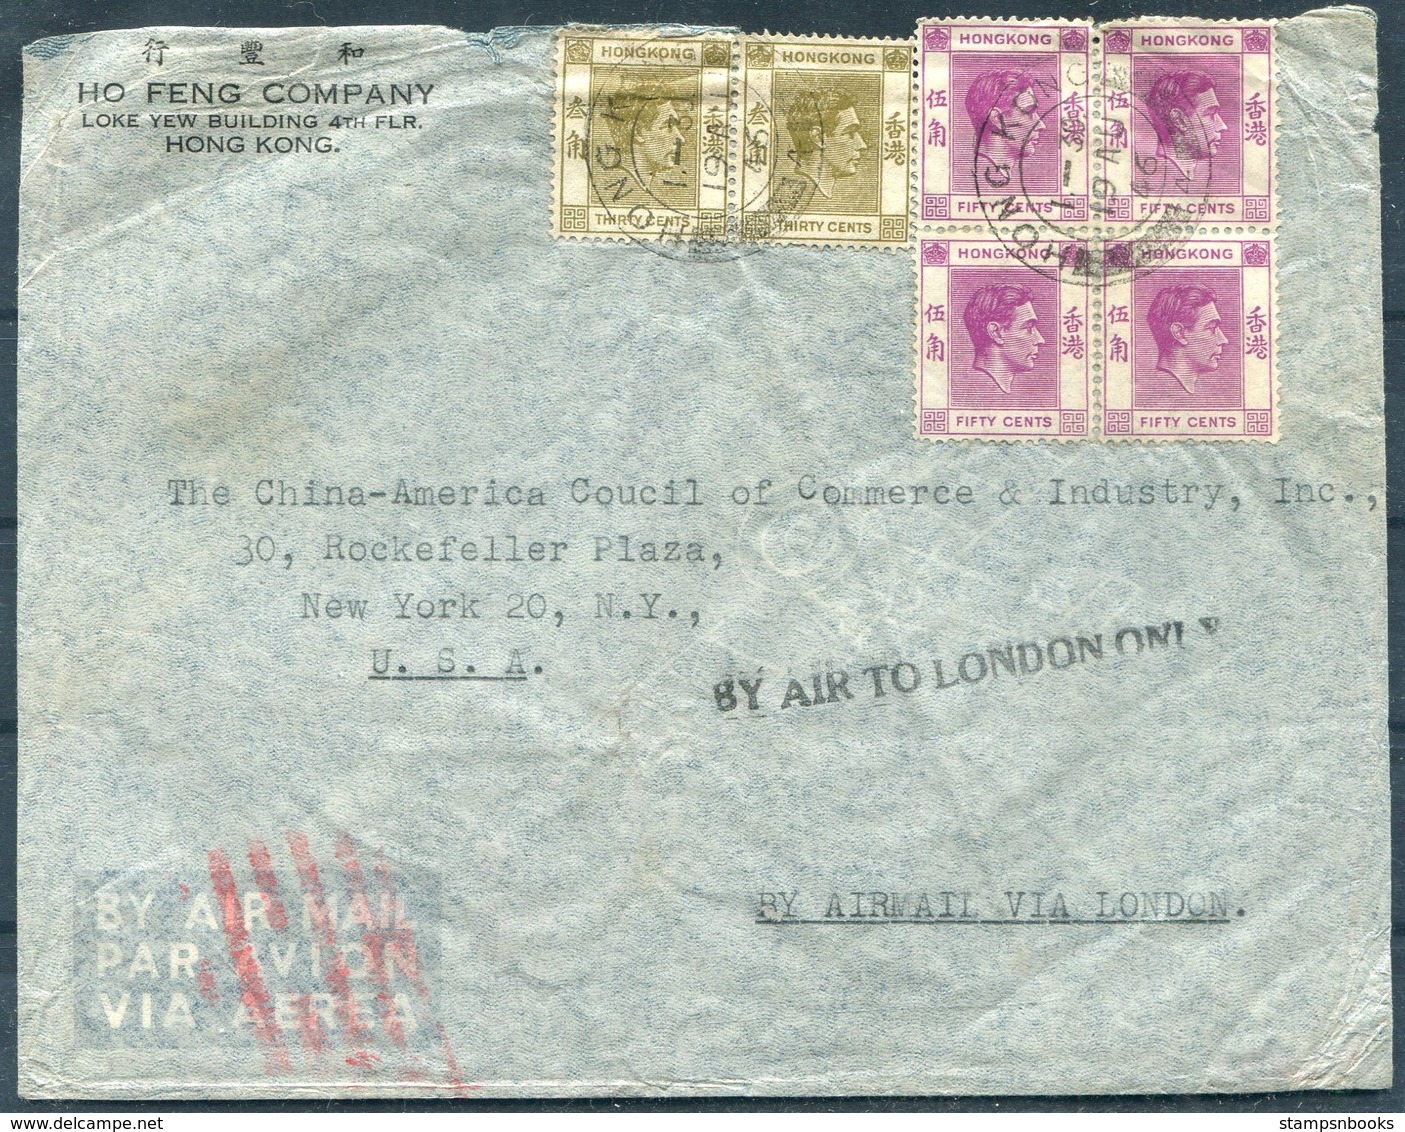 1946 Hong Kong $2.60 Rate Airmail Cover - The China America Council Of Commerce, New York USA. "BY AIR TO LONDON ONLY" - Cartas & Documentos